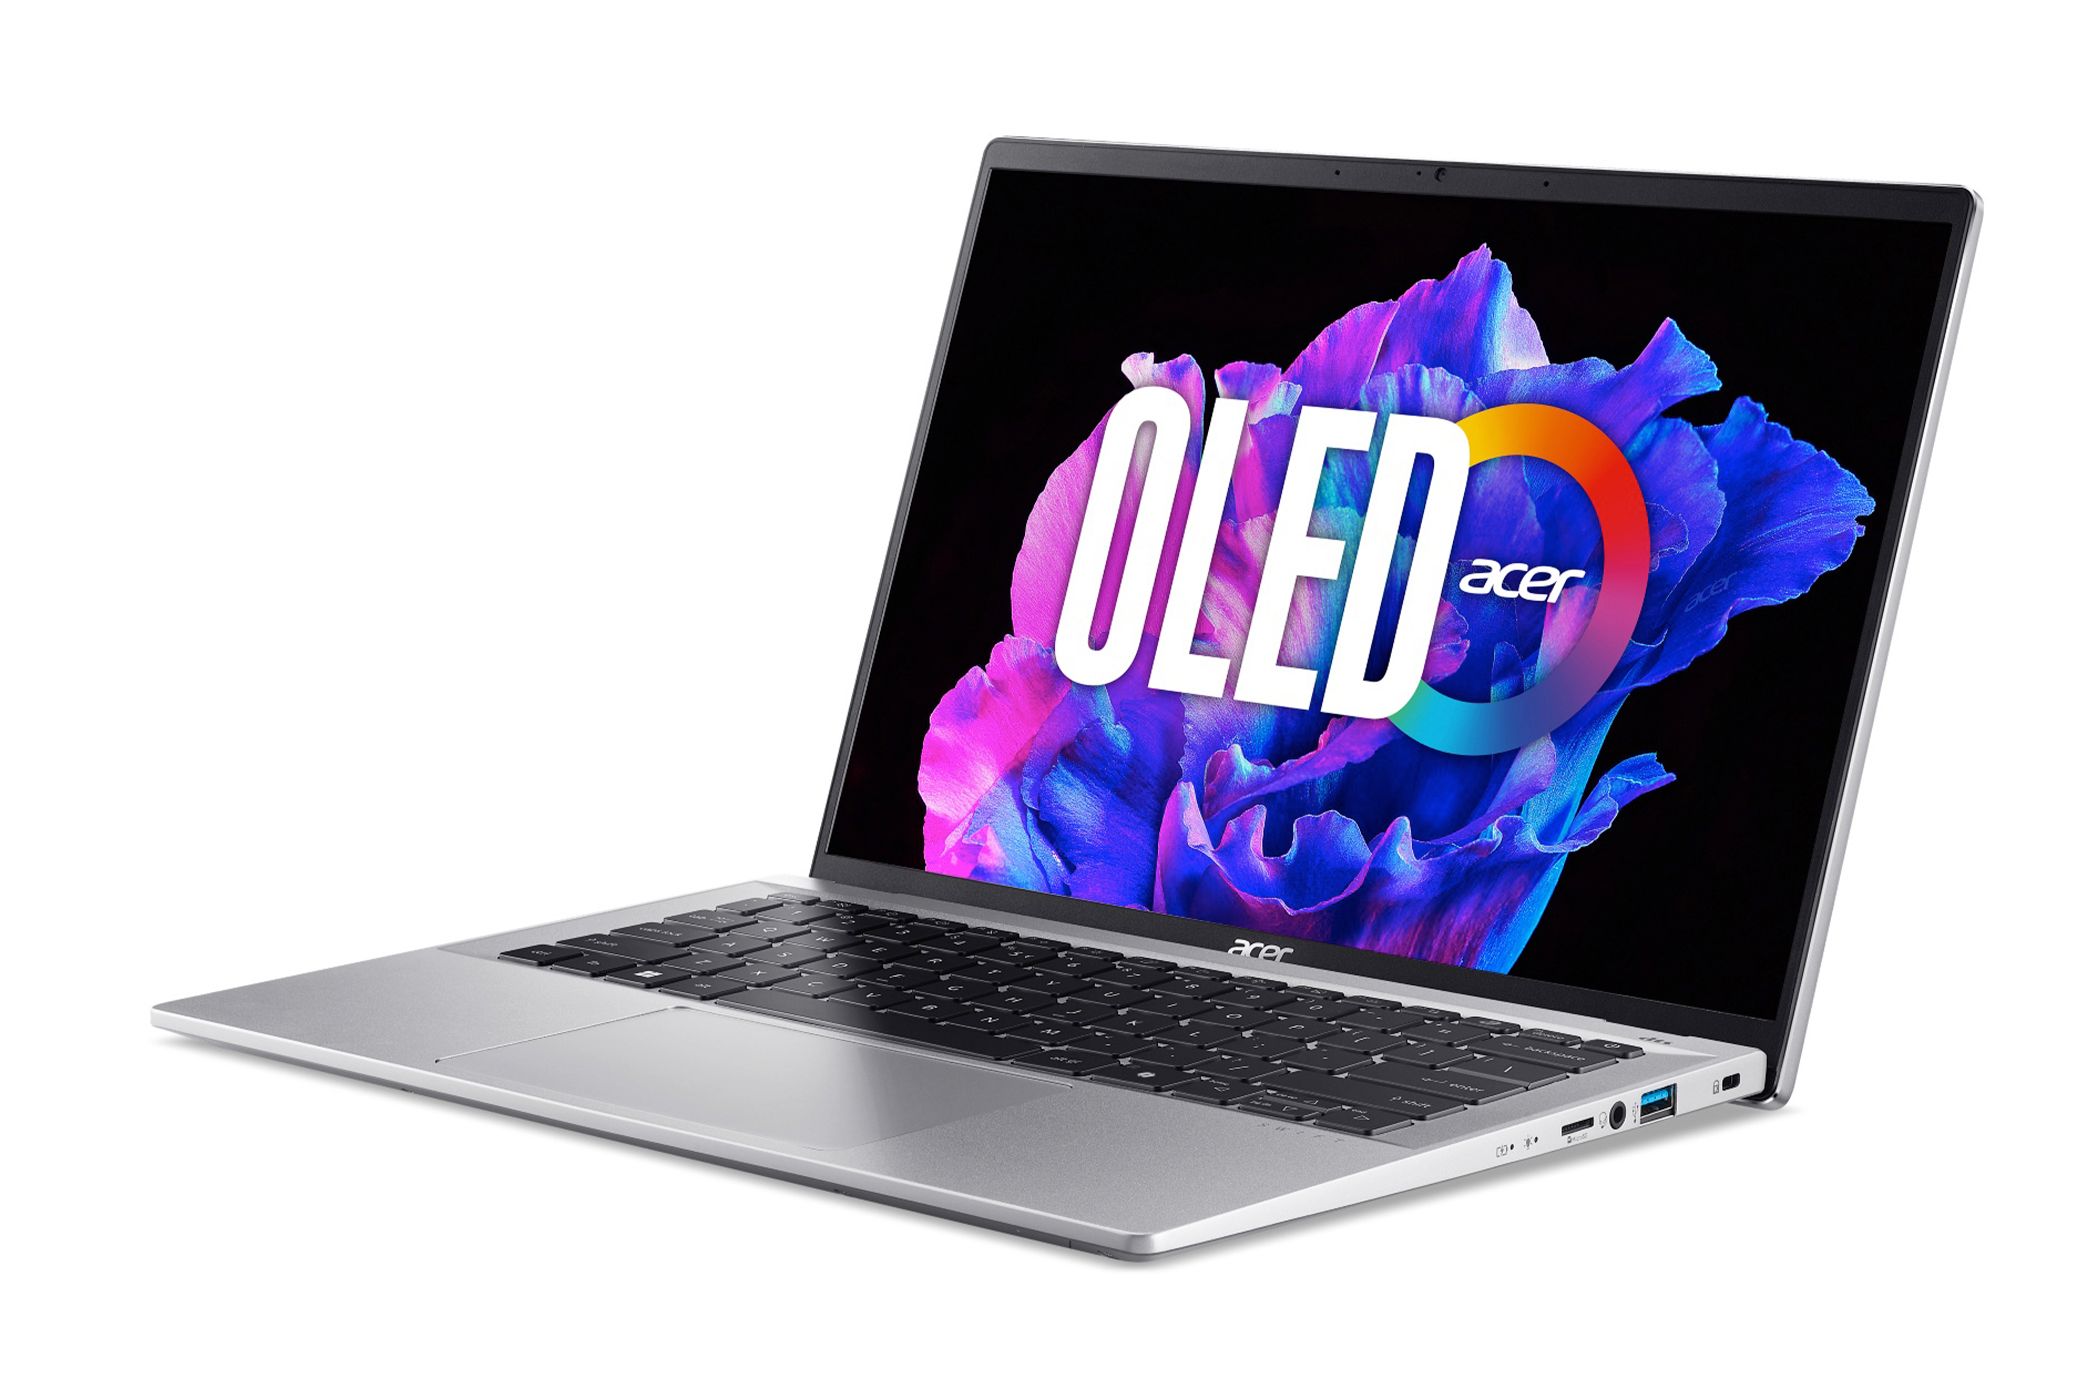 The Acer Swift Go 14 laptop on a white background.